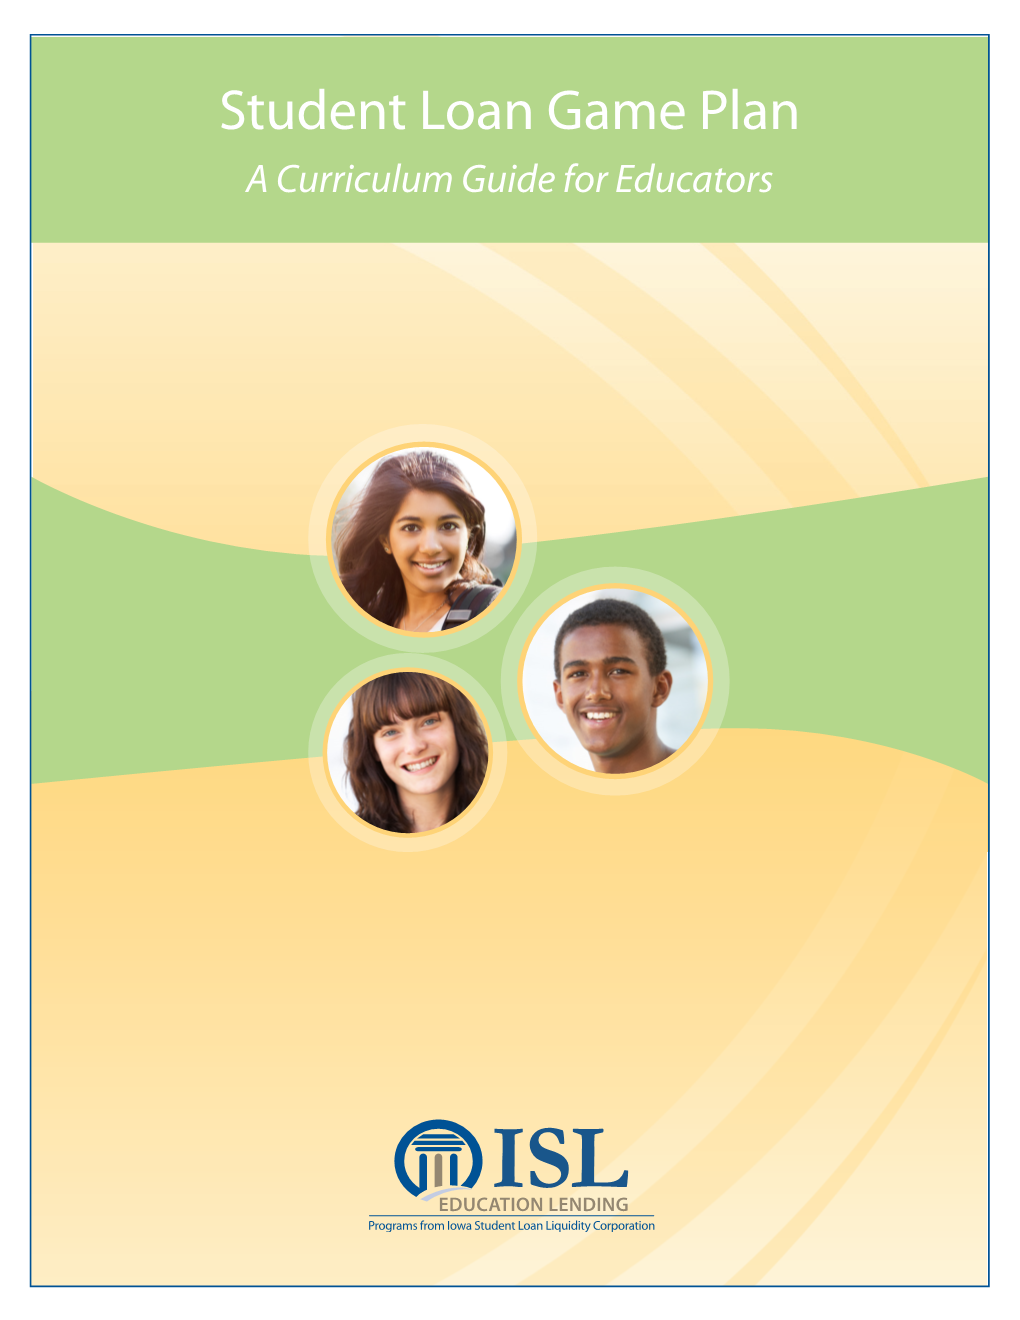 Student Loan Game Plan Curriculum Guide